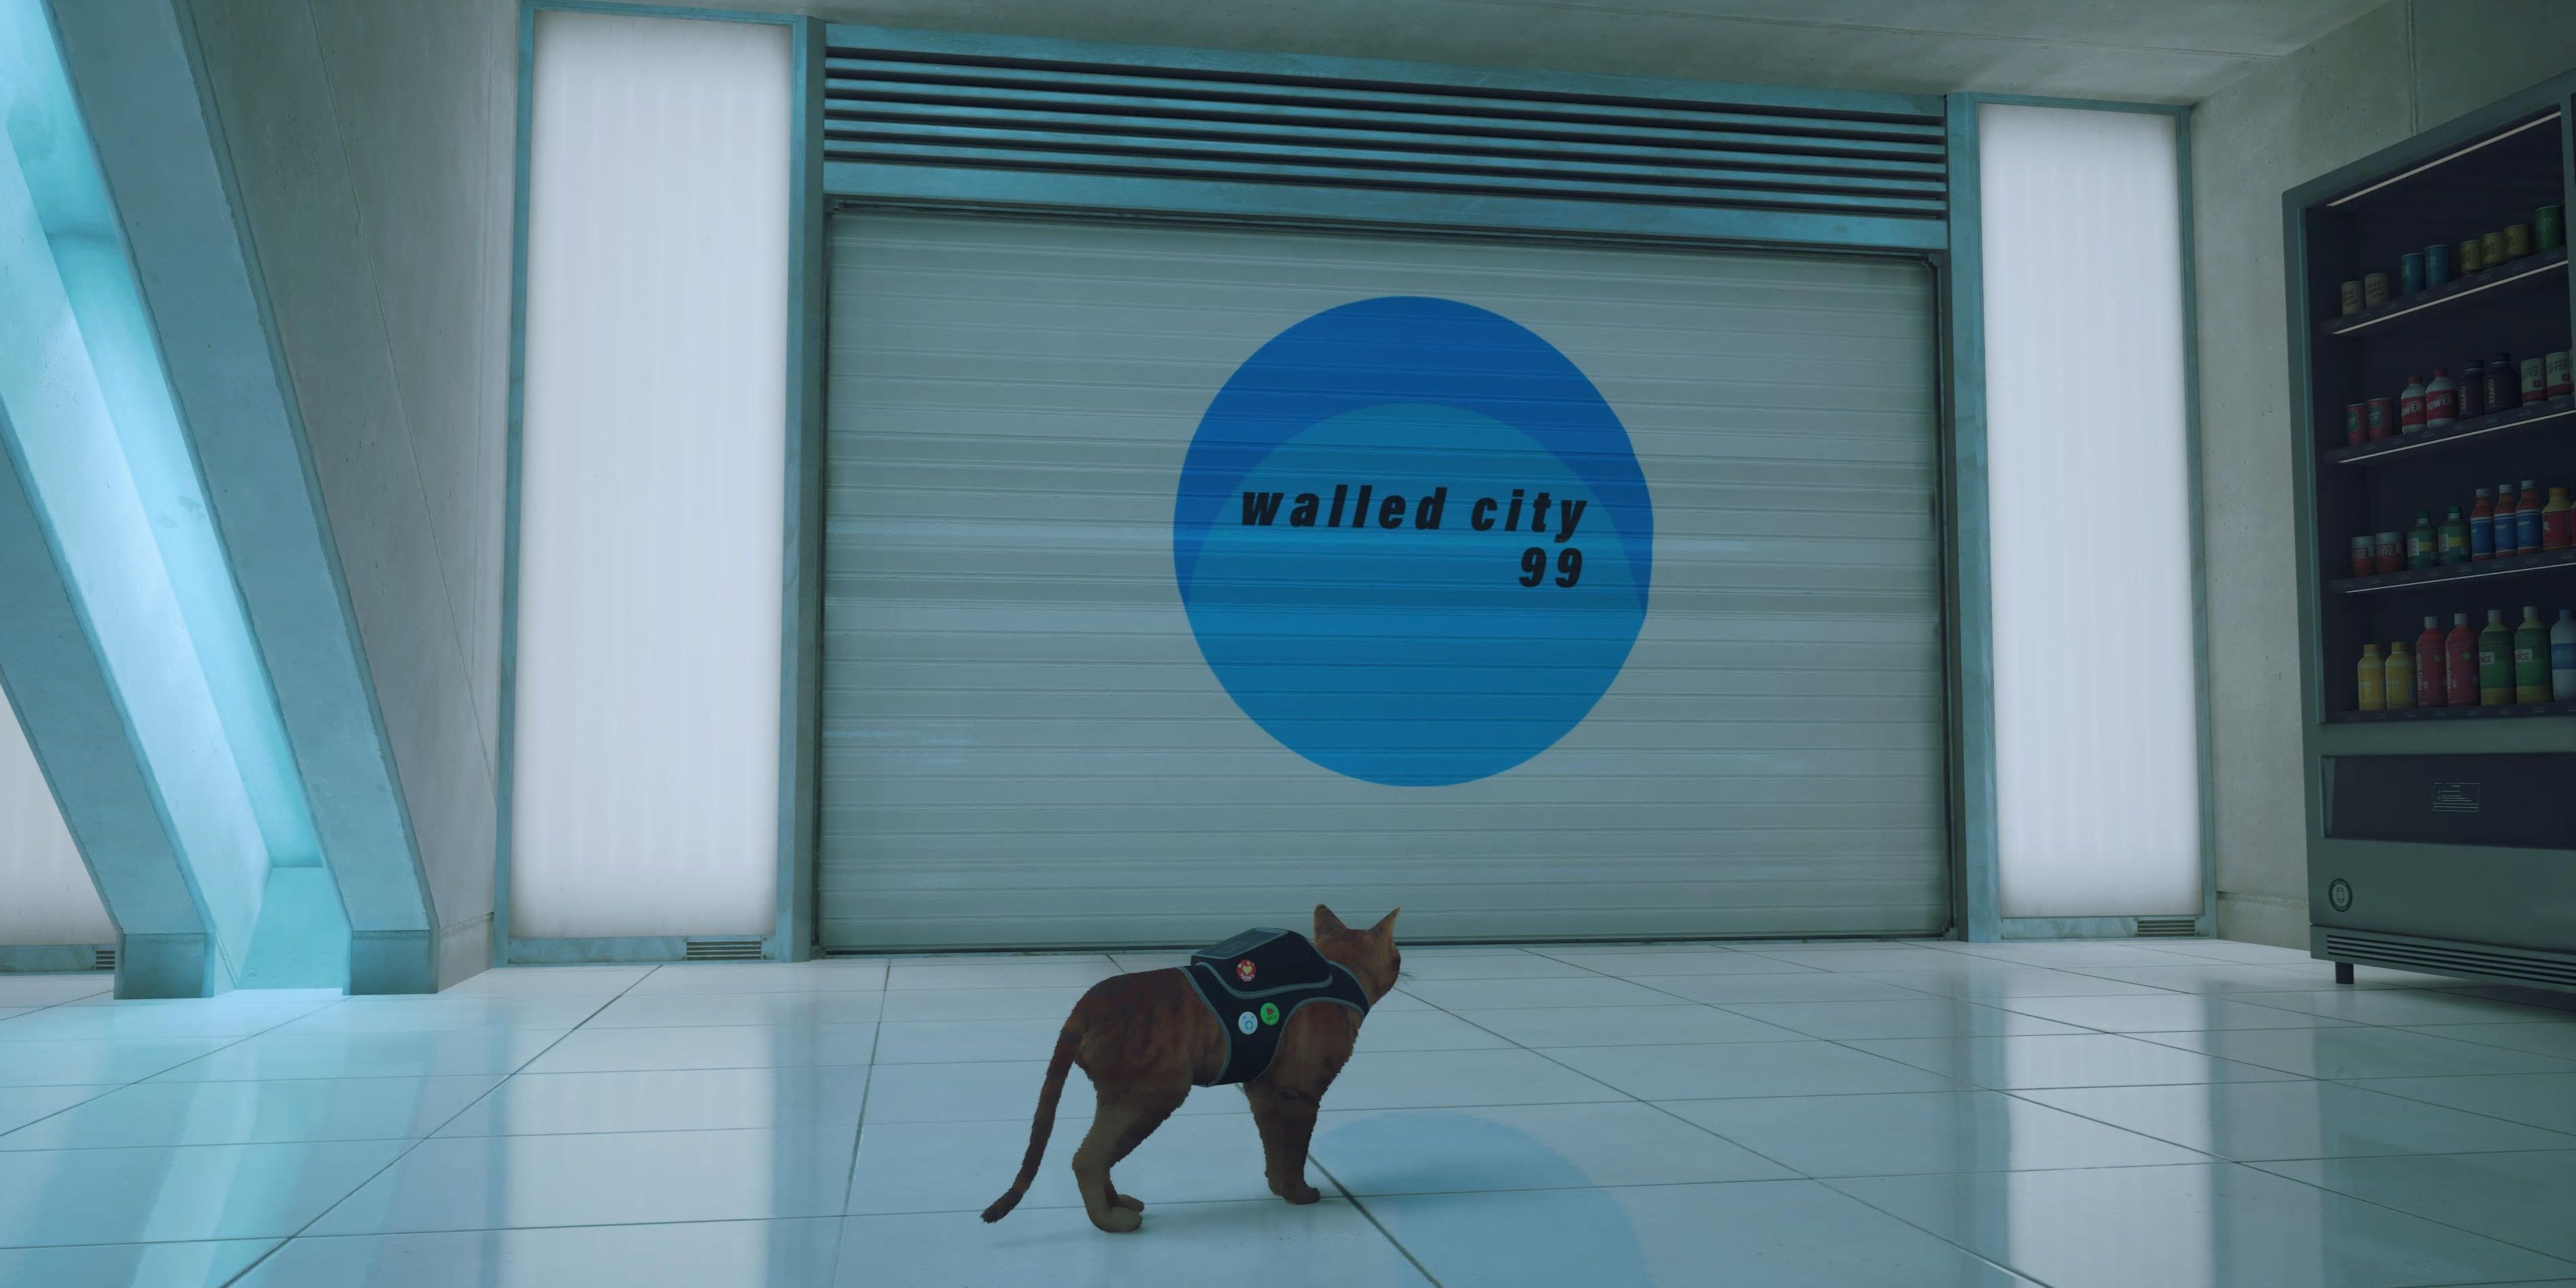 Stray cat reaches Control Room and it says Walled City 99